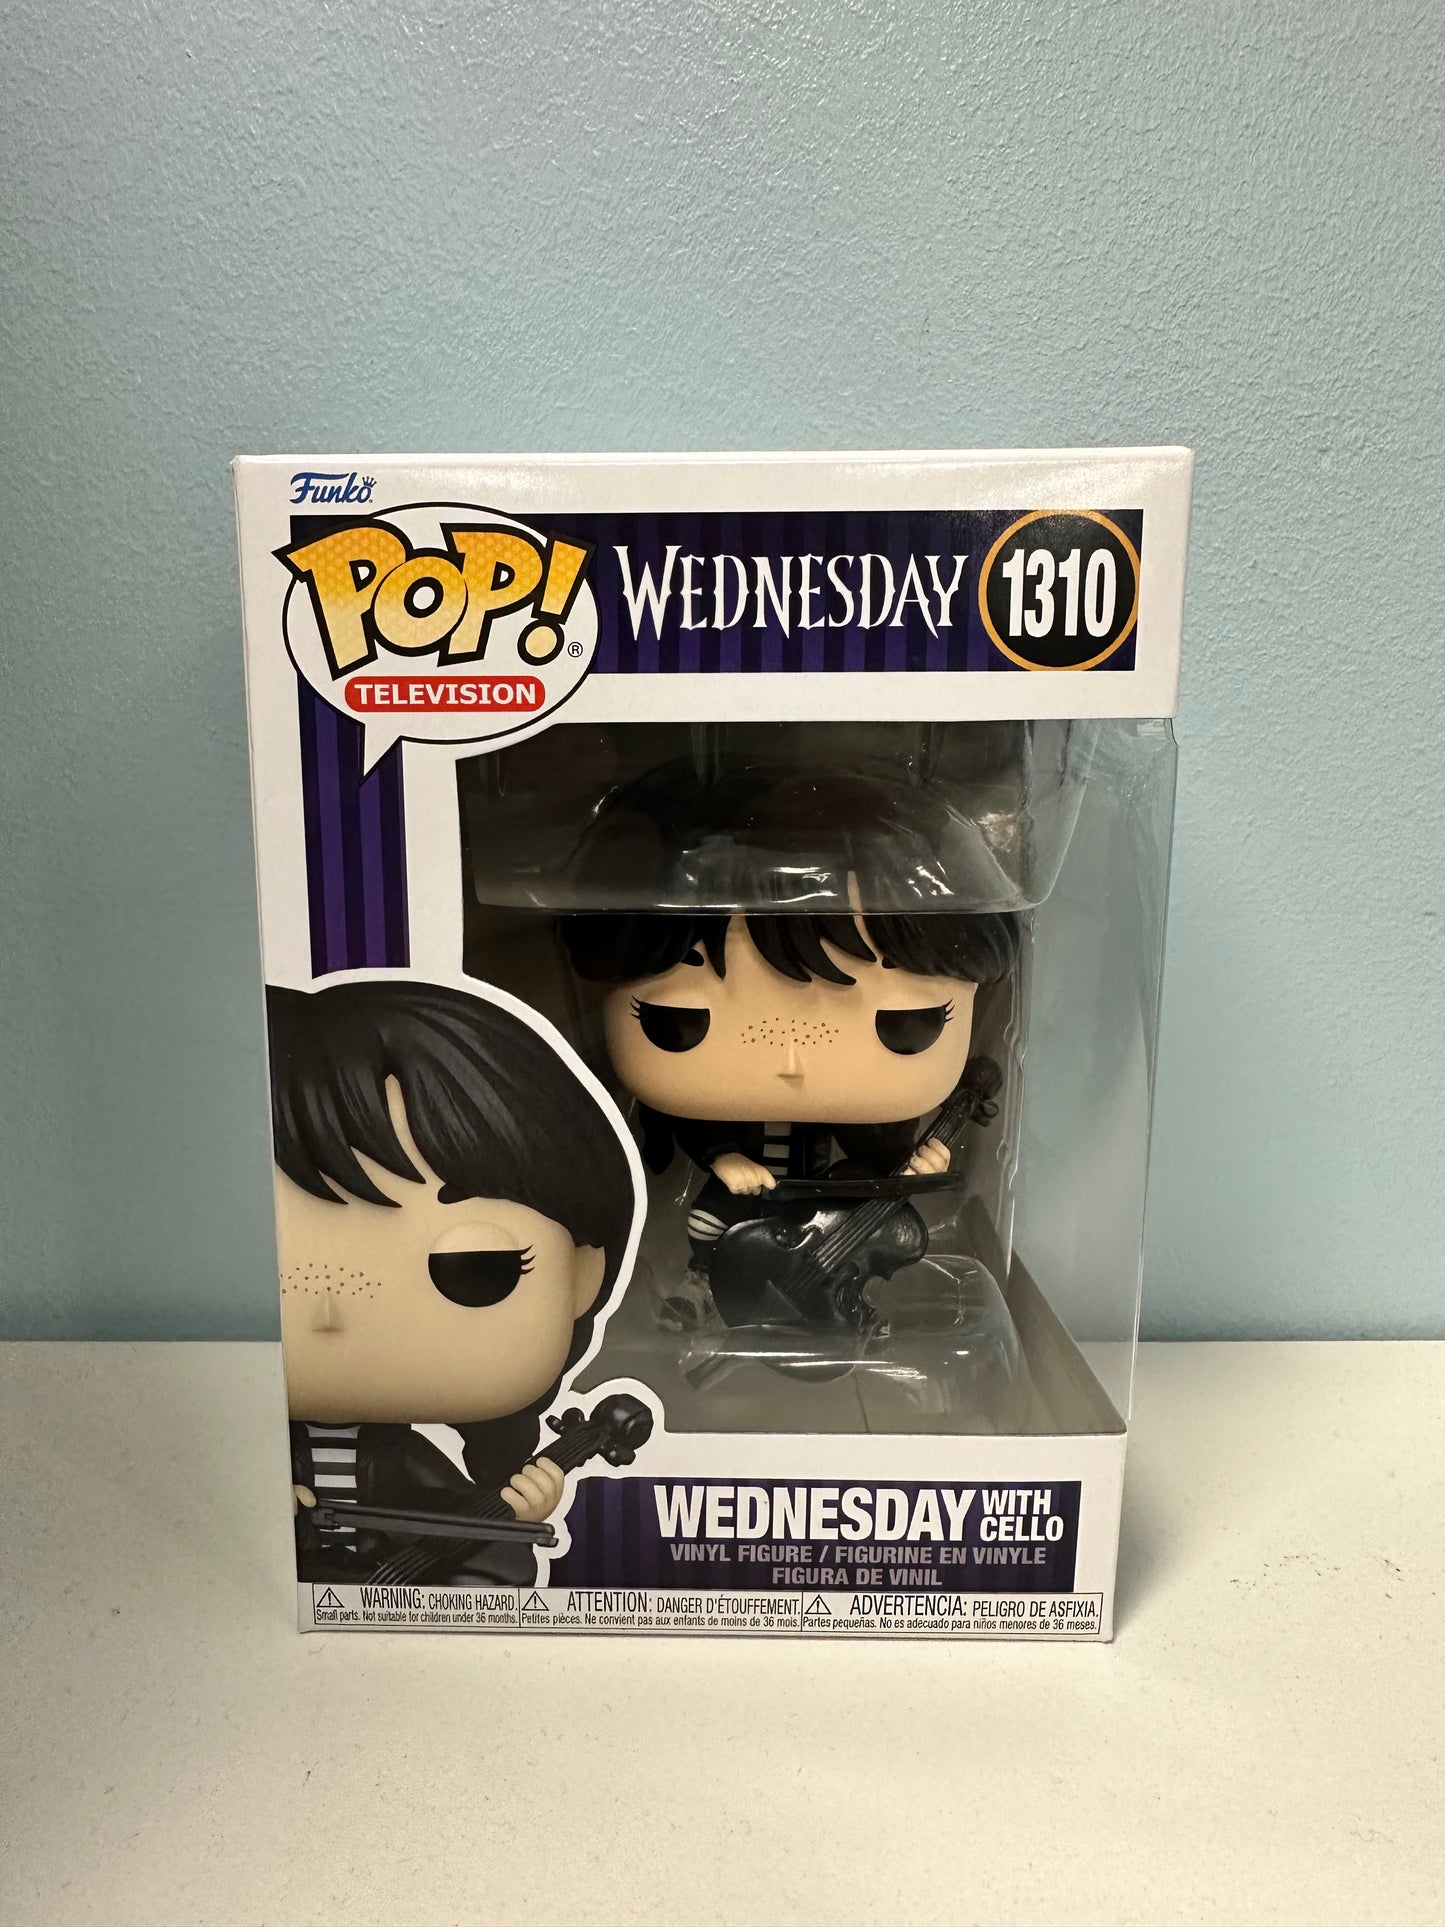 Buy Pop! Wednesday with Cello at Funko.